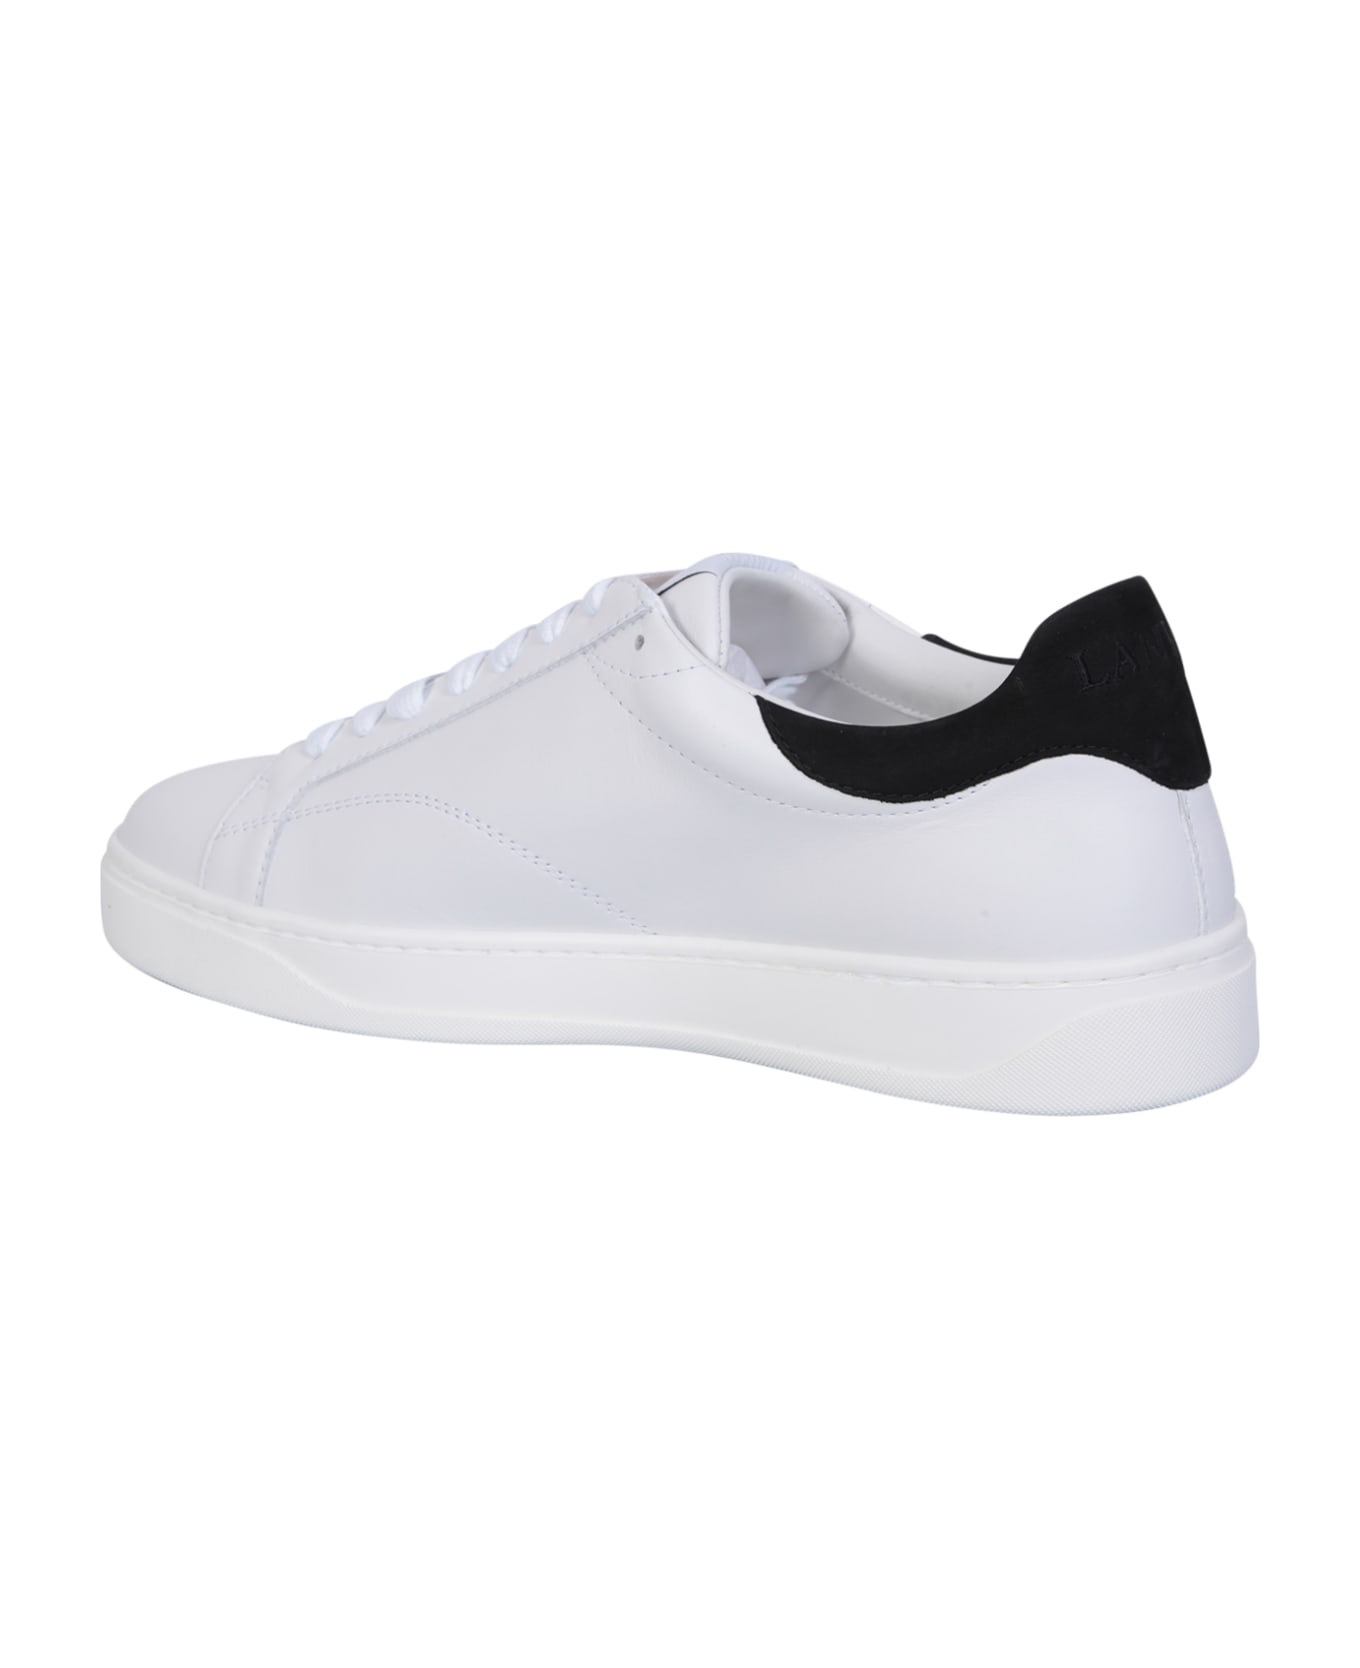 Lanvin White And Black Ddb0 Sneakers - Bianco スニーカー